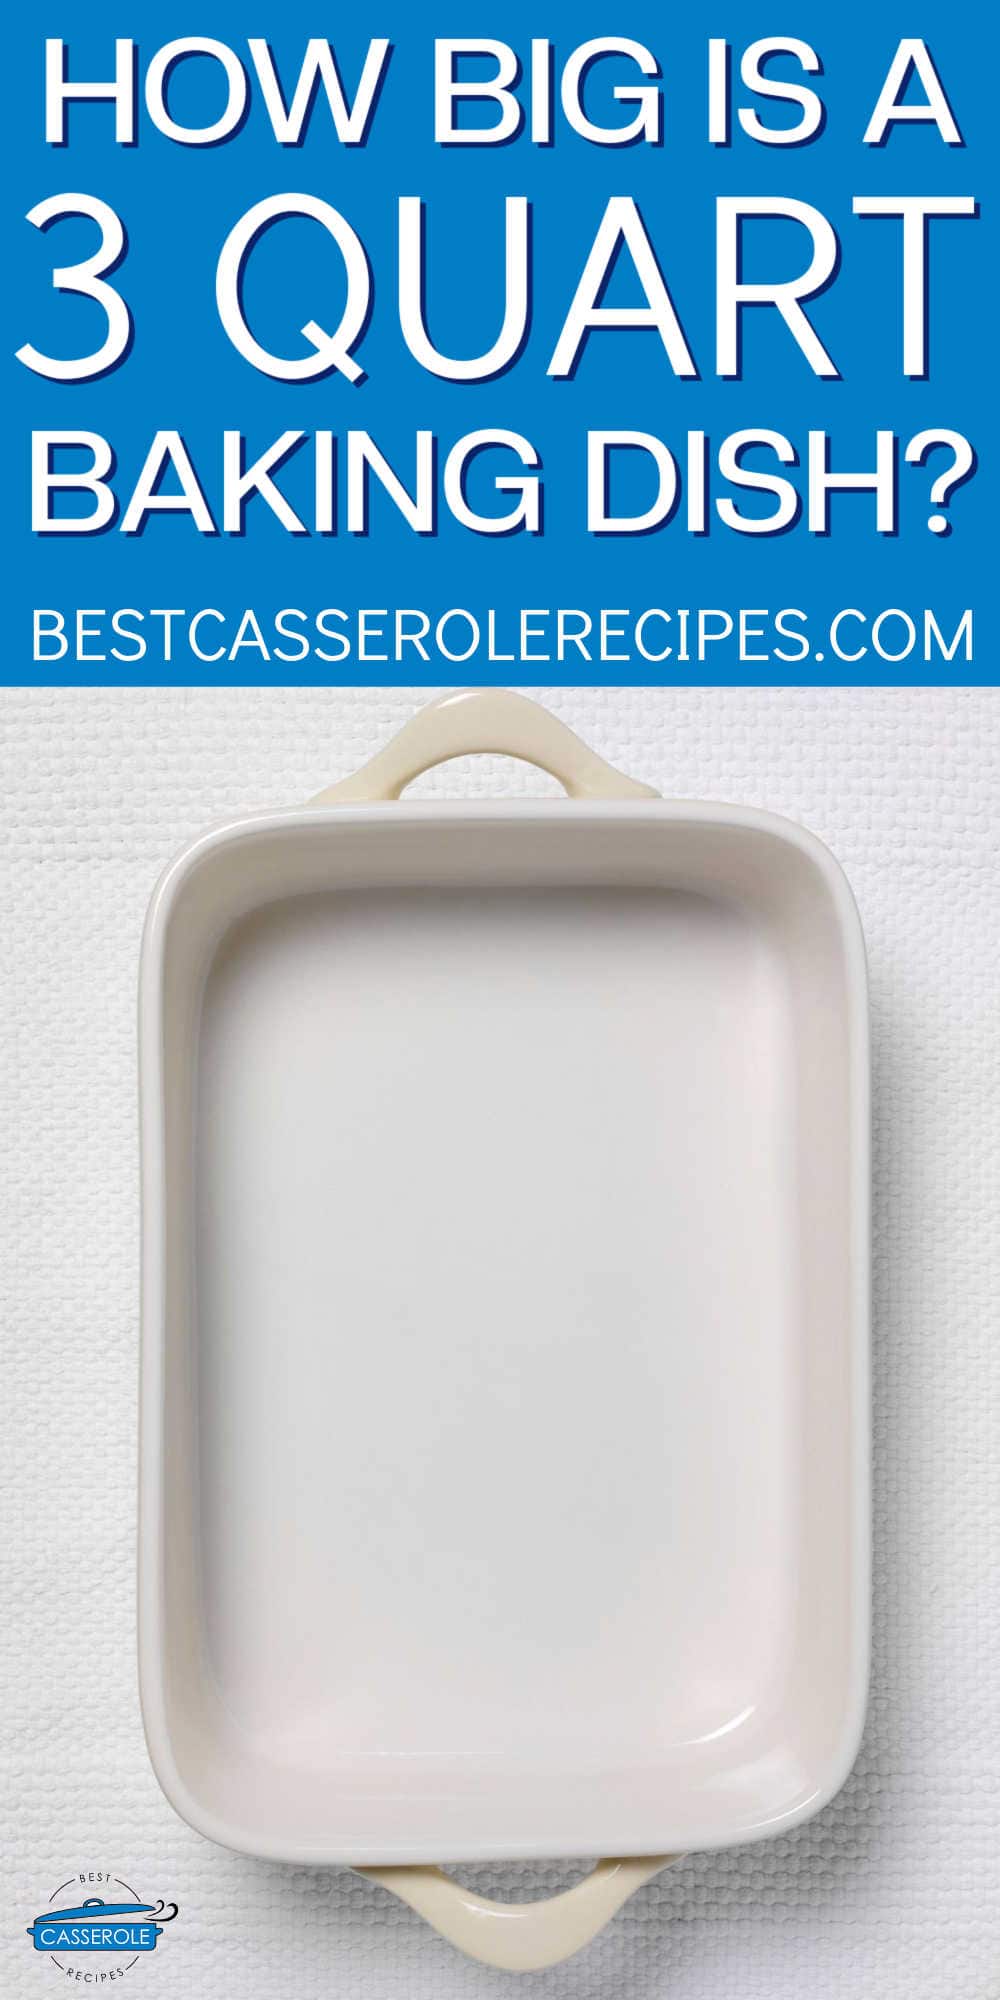 empty white baking dish with blue banner and white text